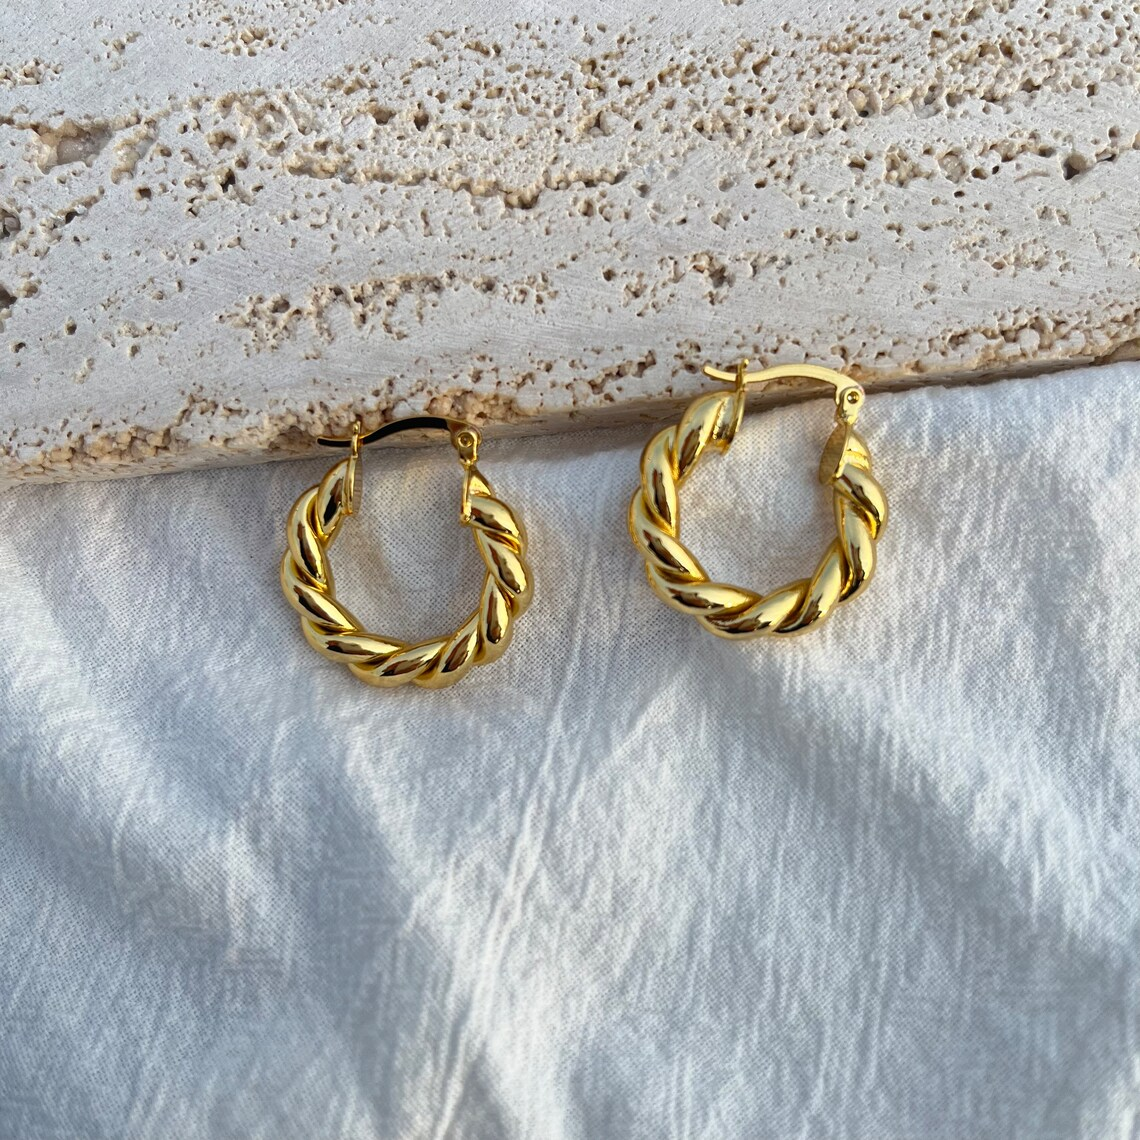 22mm Gold Plated Twist Hoop Earrings Baby Gifts-silviax